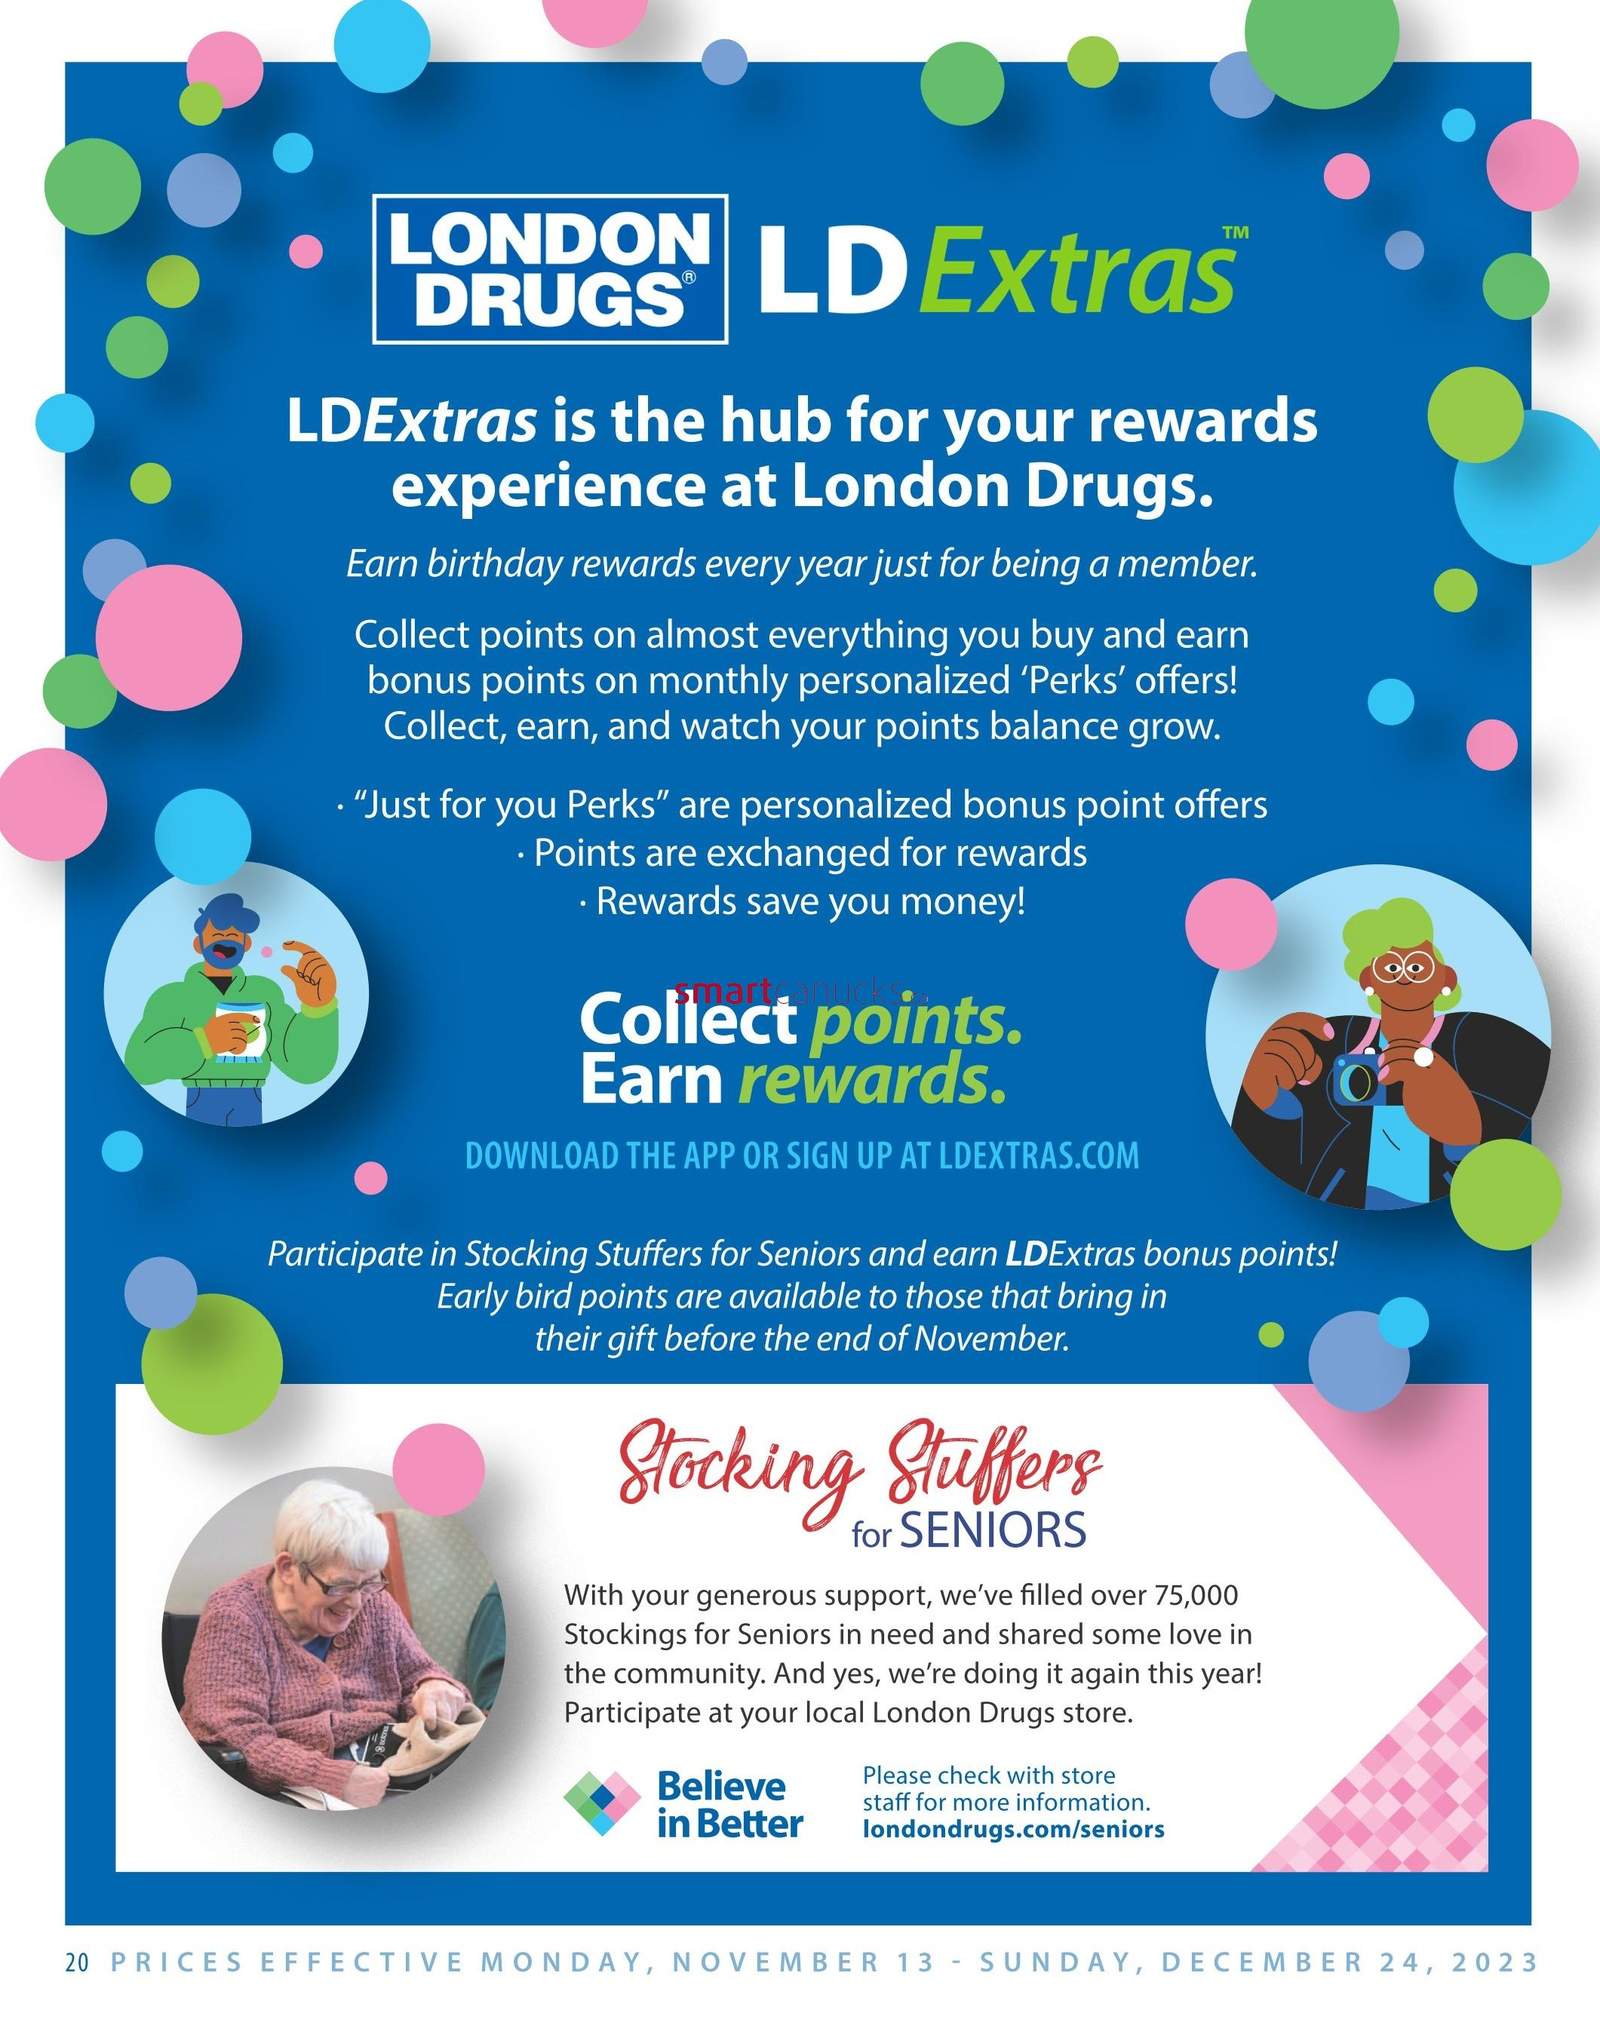 How to Get Started with the LDExtras Program - London Drugs Blog